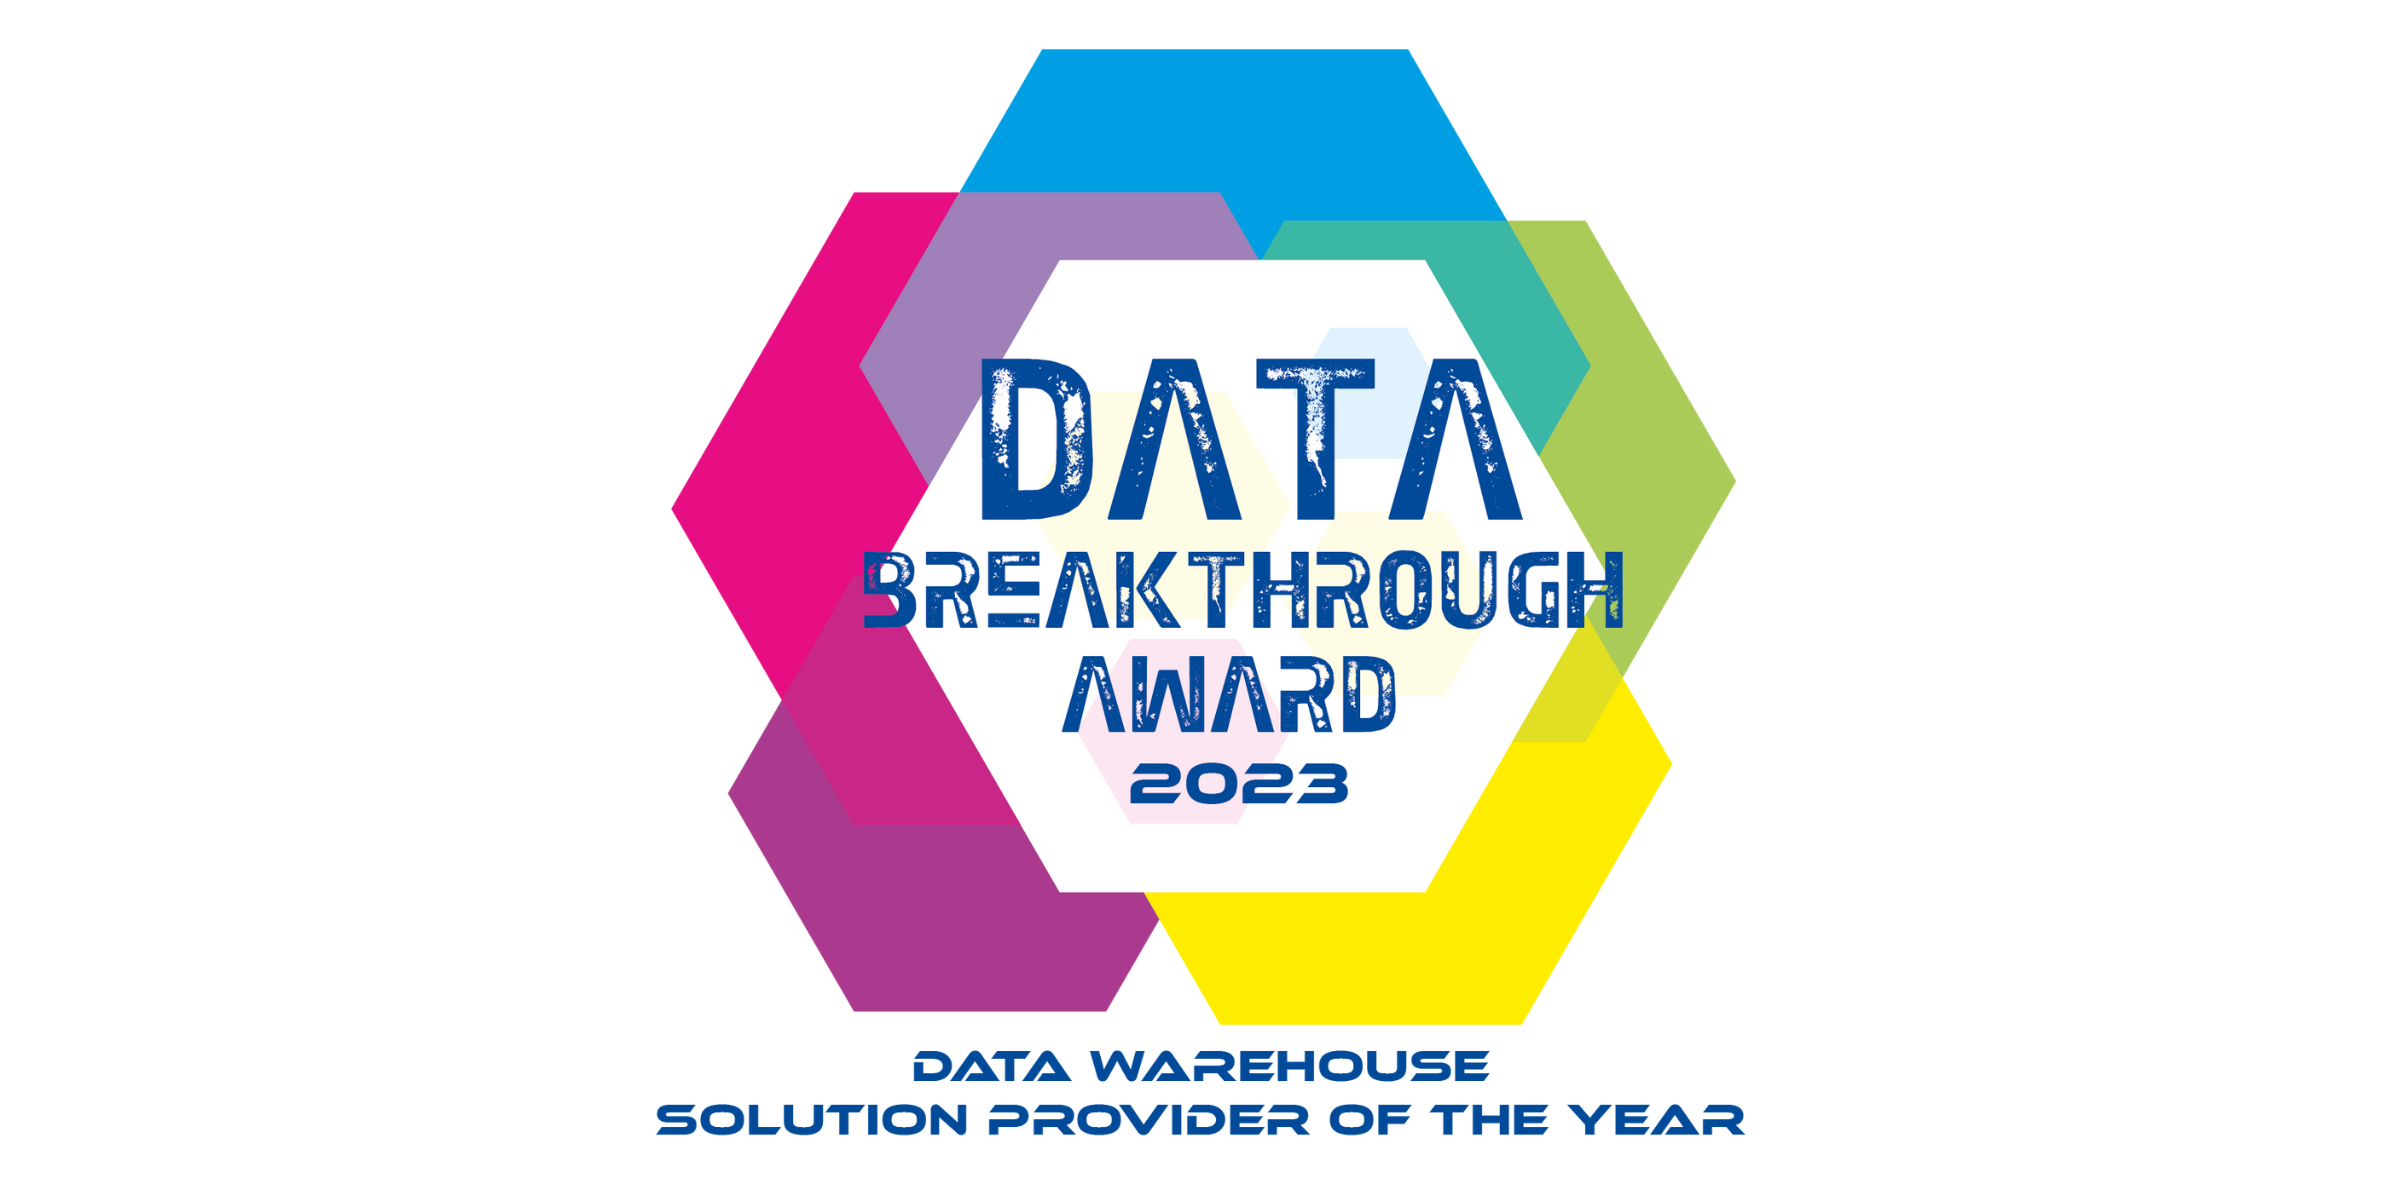 TimeXtender Named “Data Warehouse Solution Provider Of The Year”